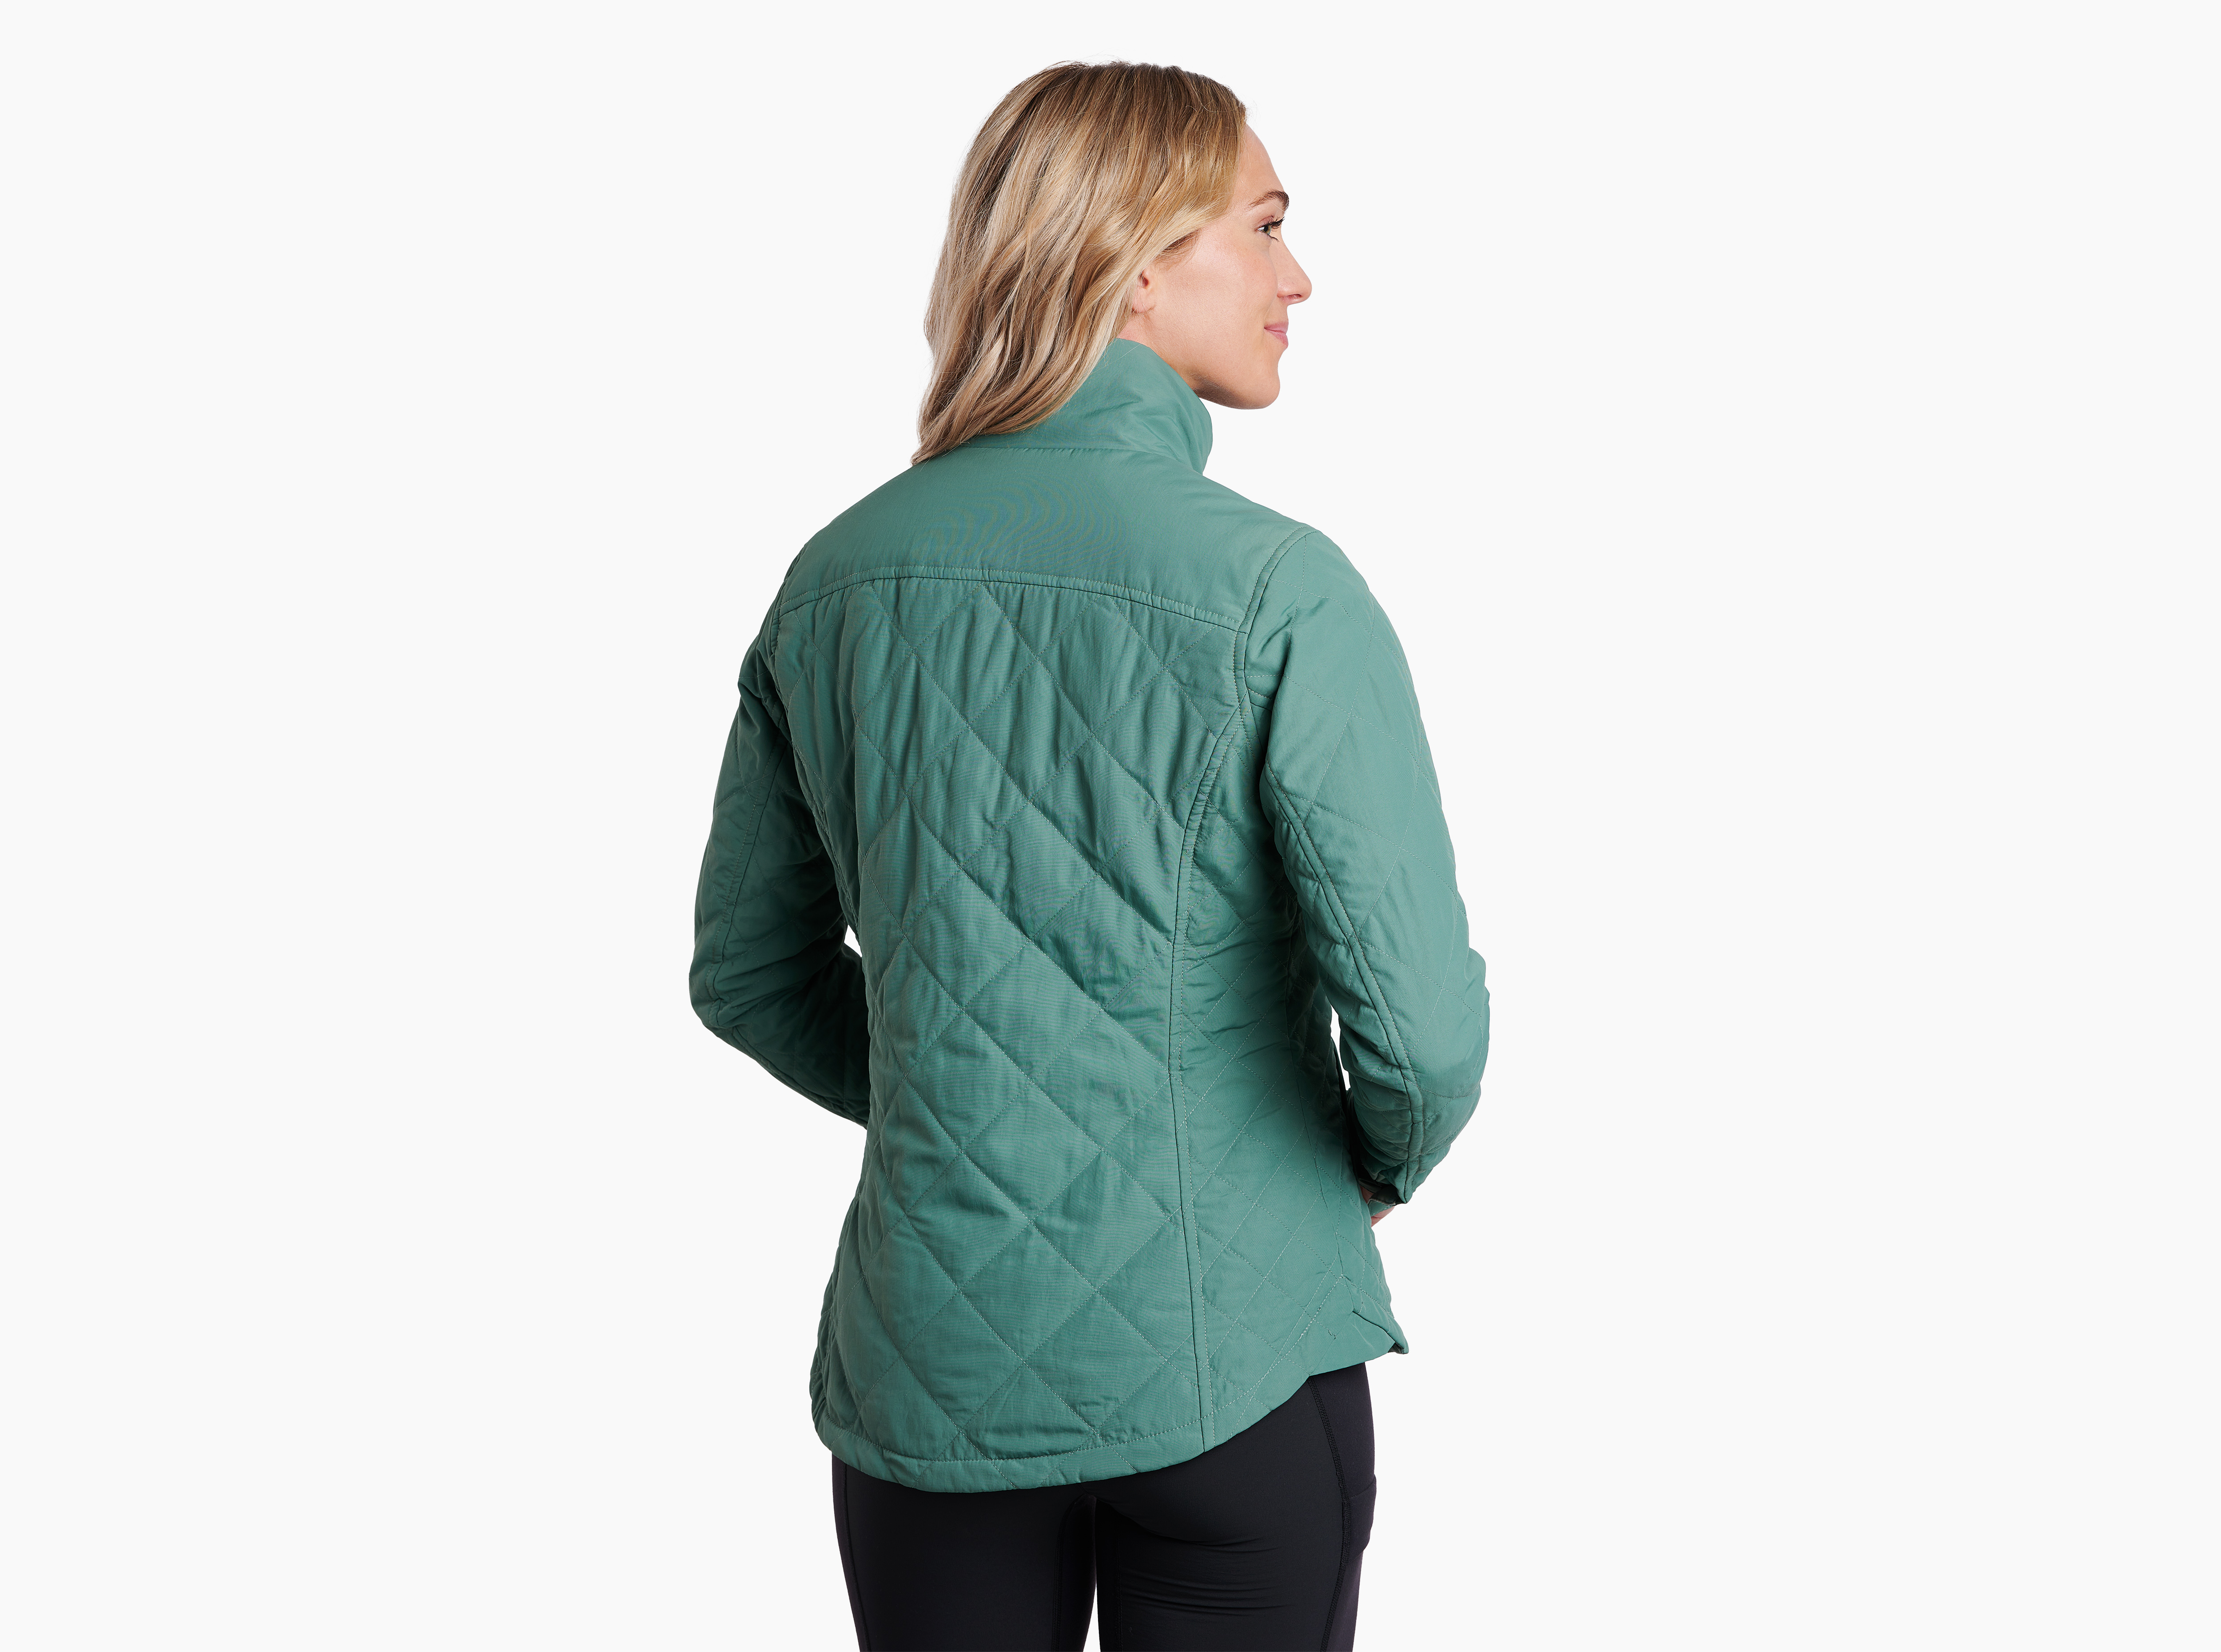 Stunnr™ Insulated Jacket in Women's Outerwear